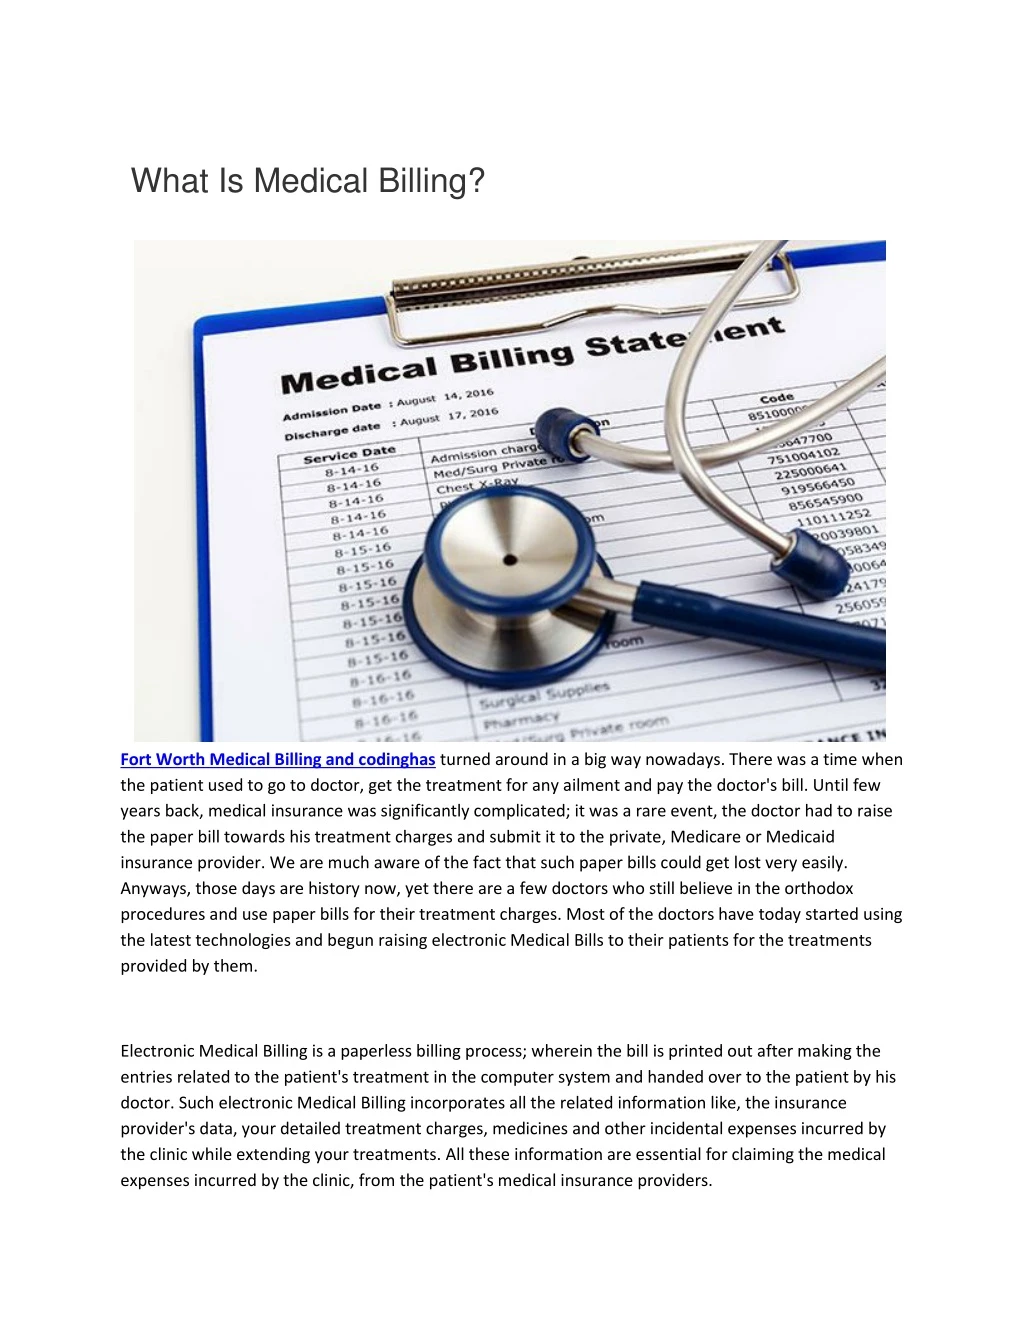 what is medical billing